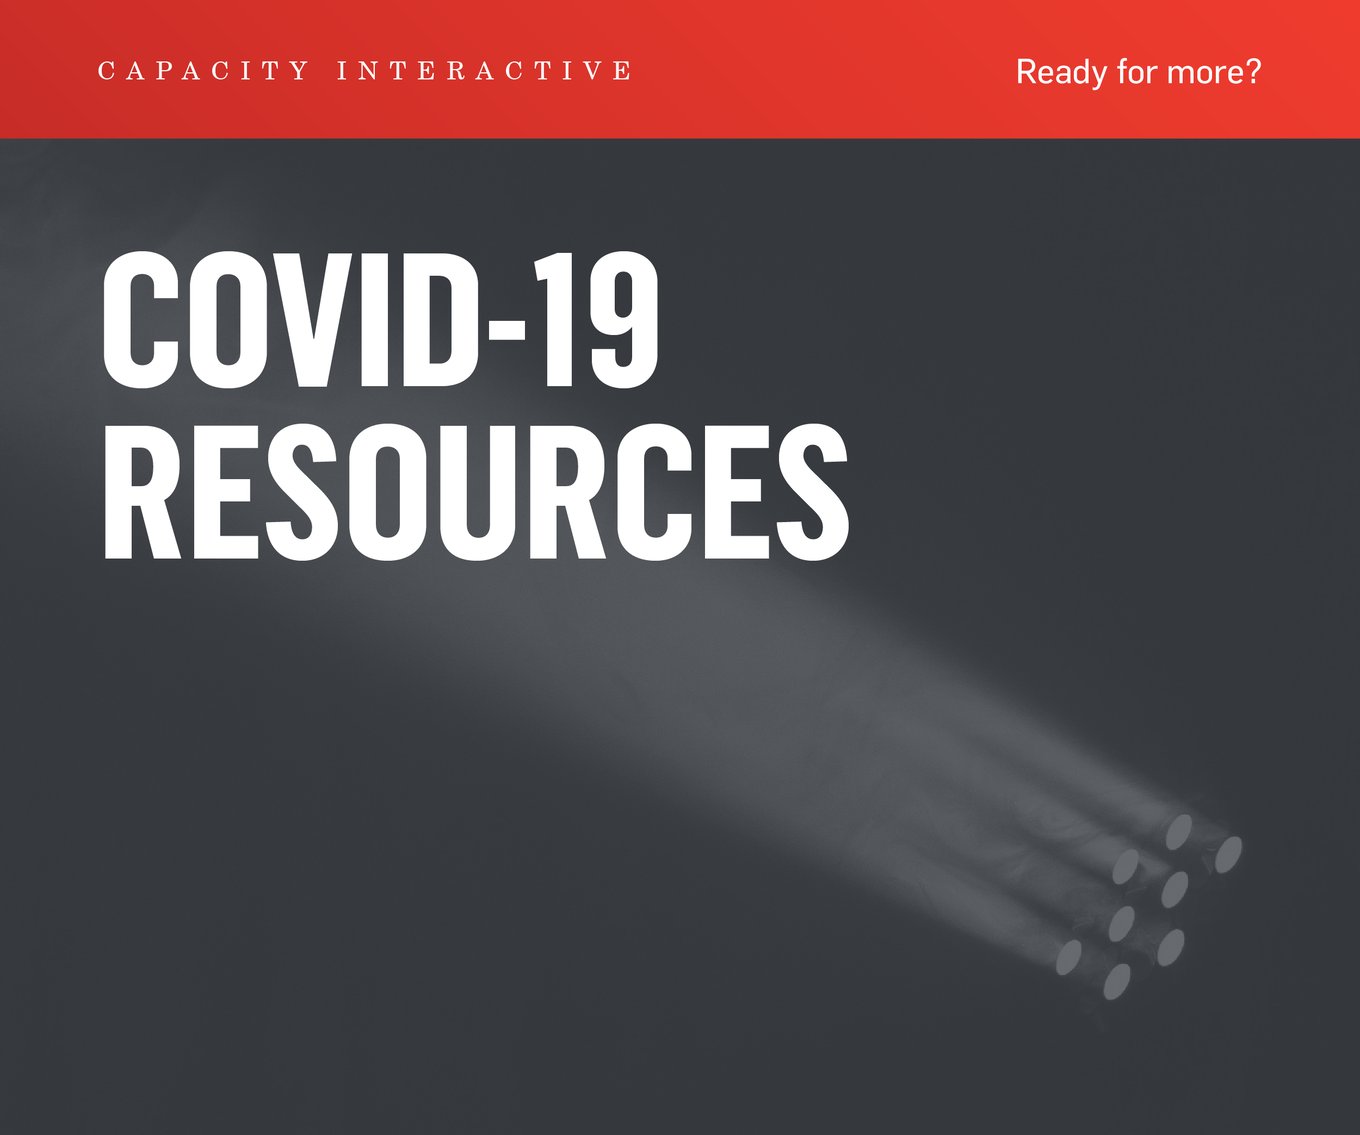 COVID-19 RESOURCES - Ready for more?